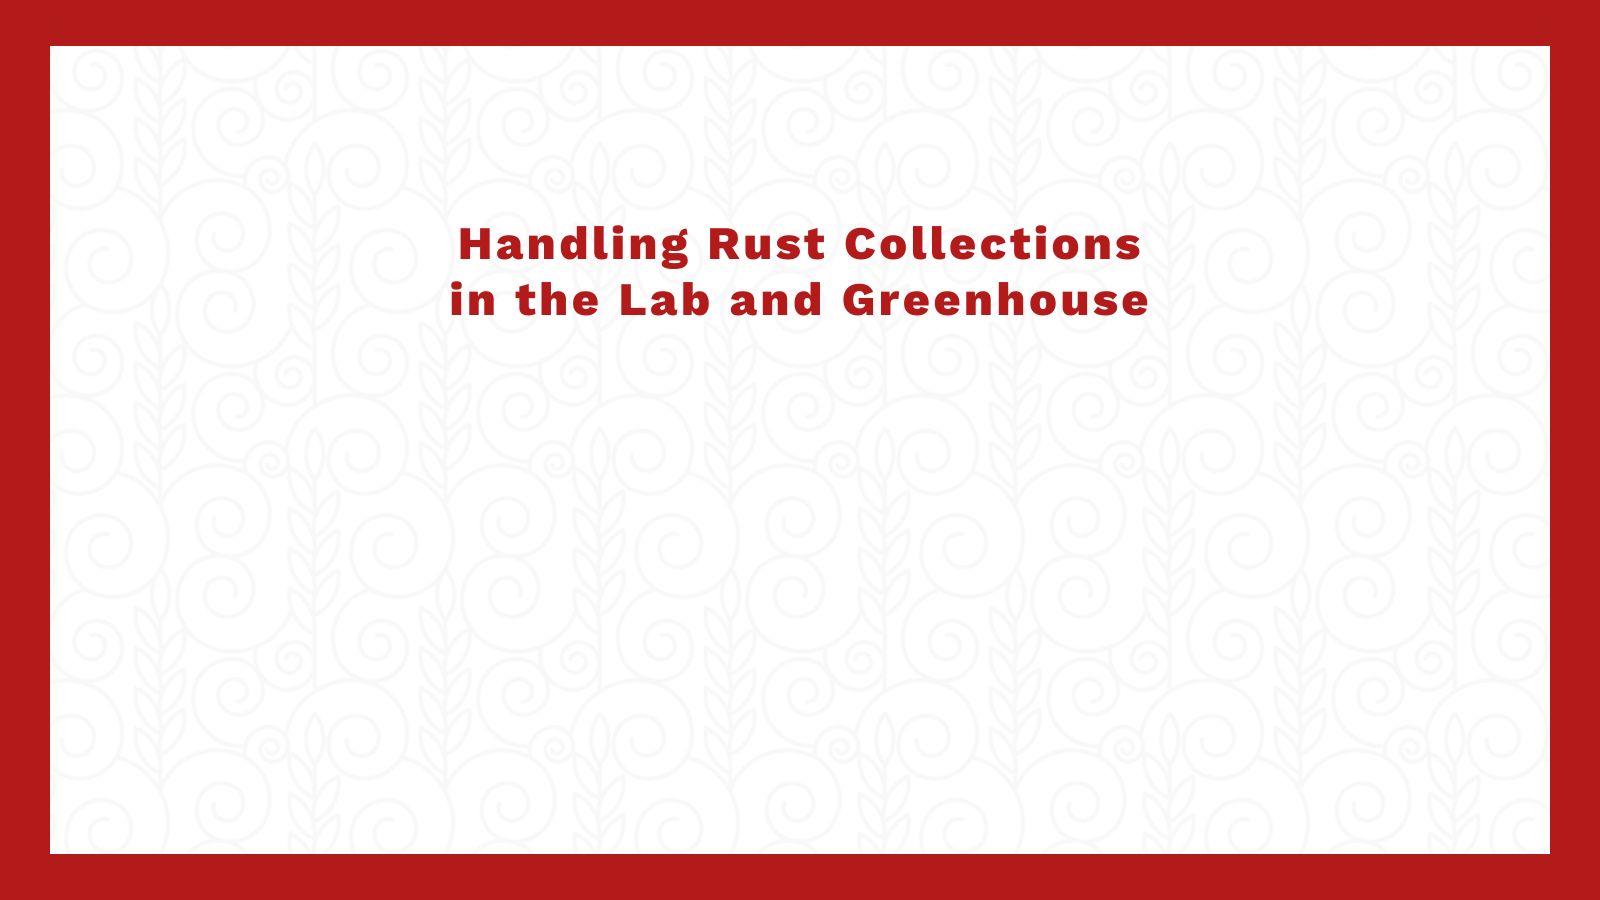 Handling Rust Collections in the Lab and Greenhouse